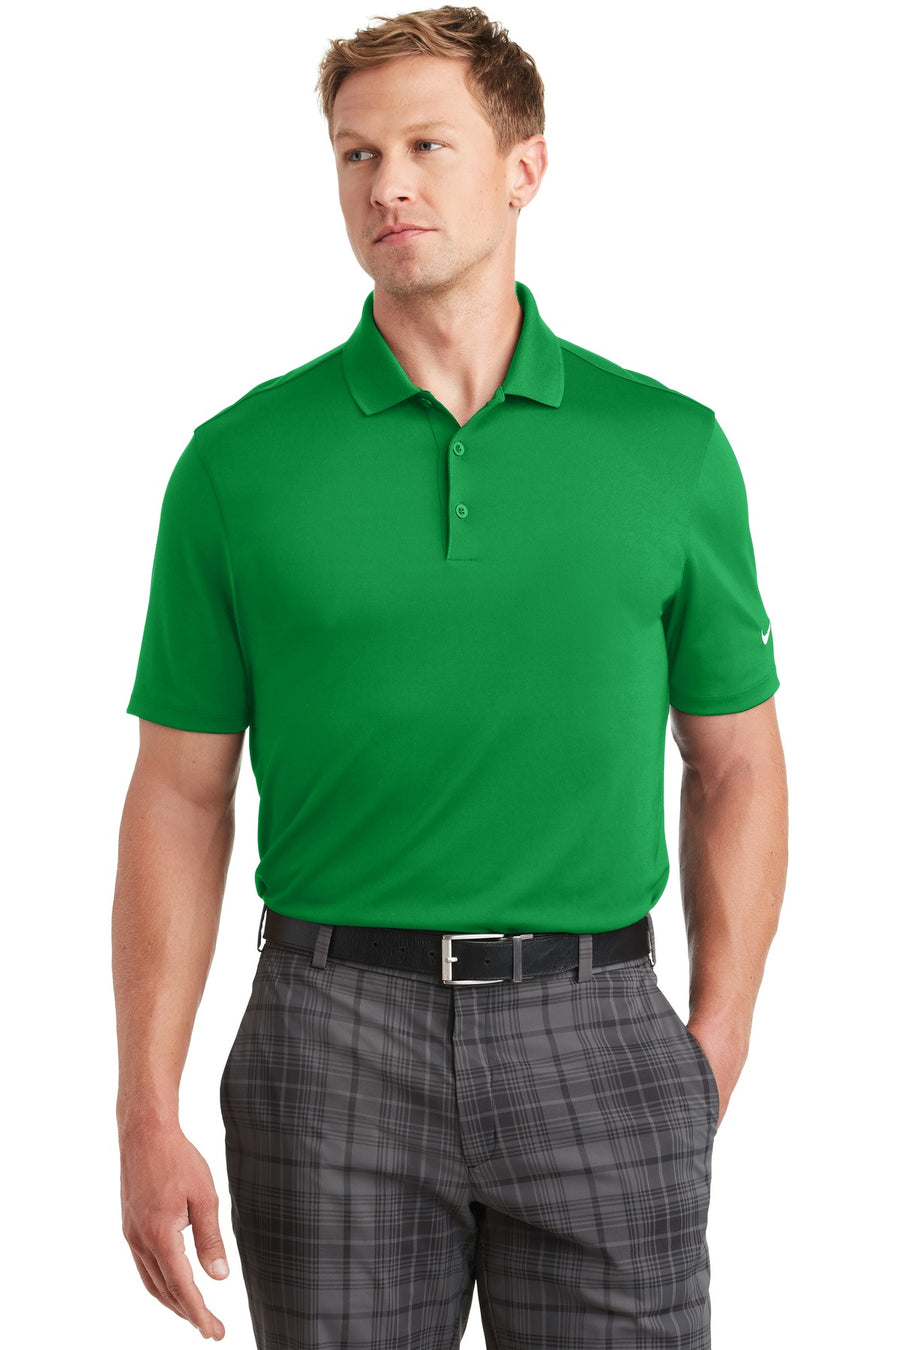 Nike Dri-FIT Classic Fit Players Polo with Flat Knit Collar.